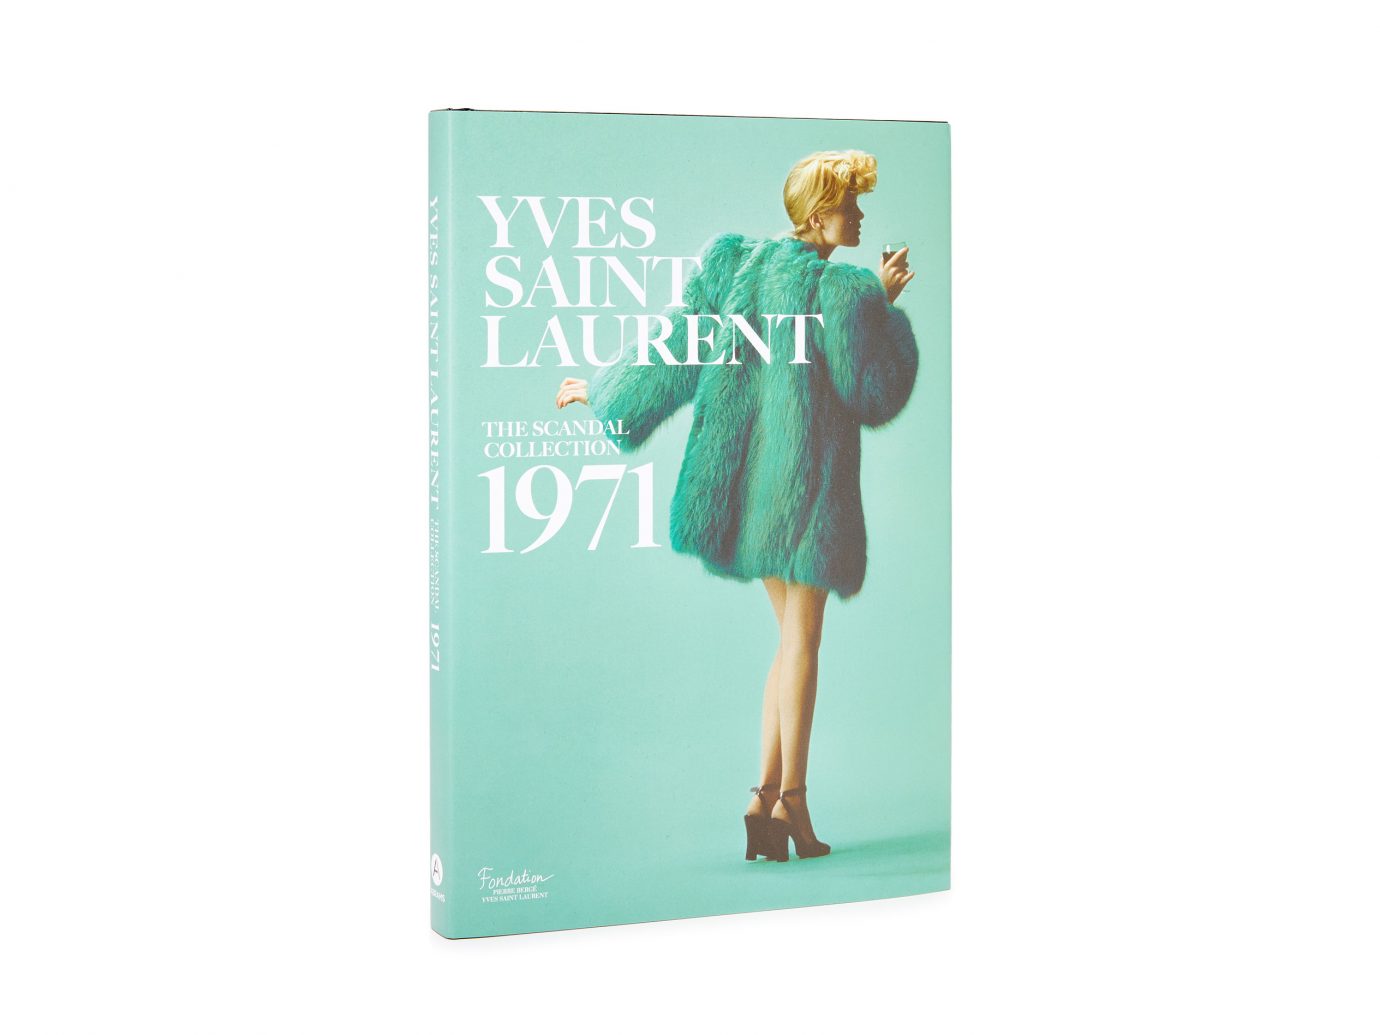 Yves Saint Laurent: The Scandal Collection Book